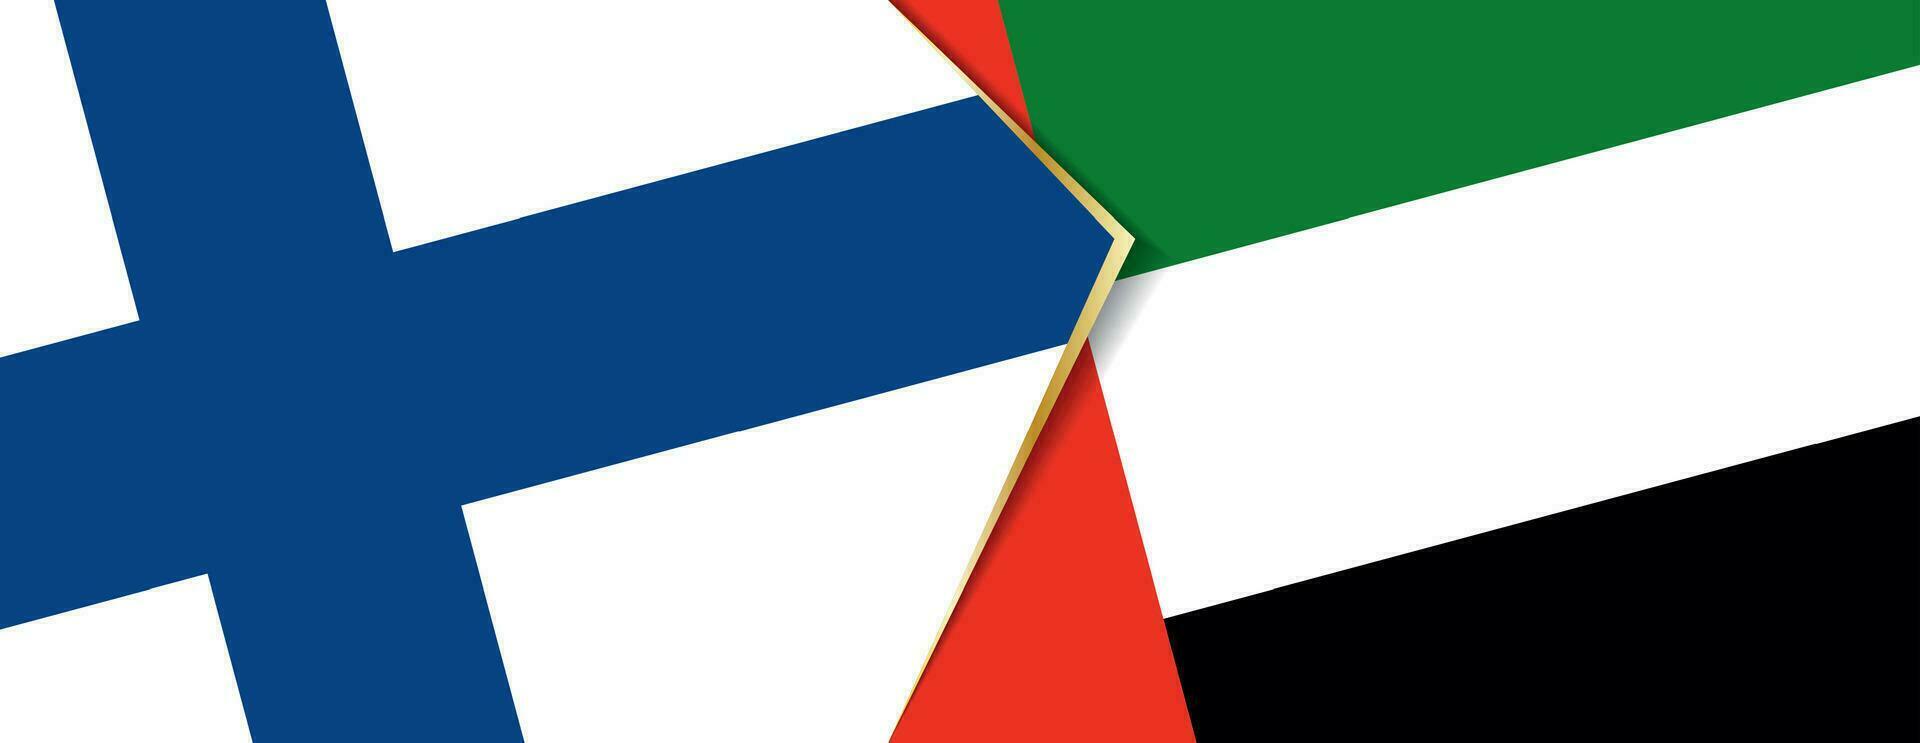 Finland and United Arab Emirates flags, two vector flags.